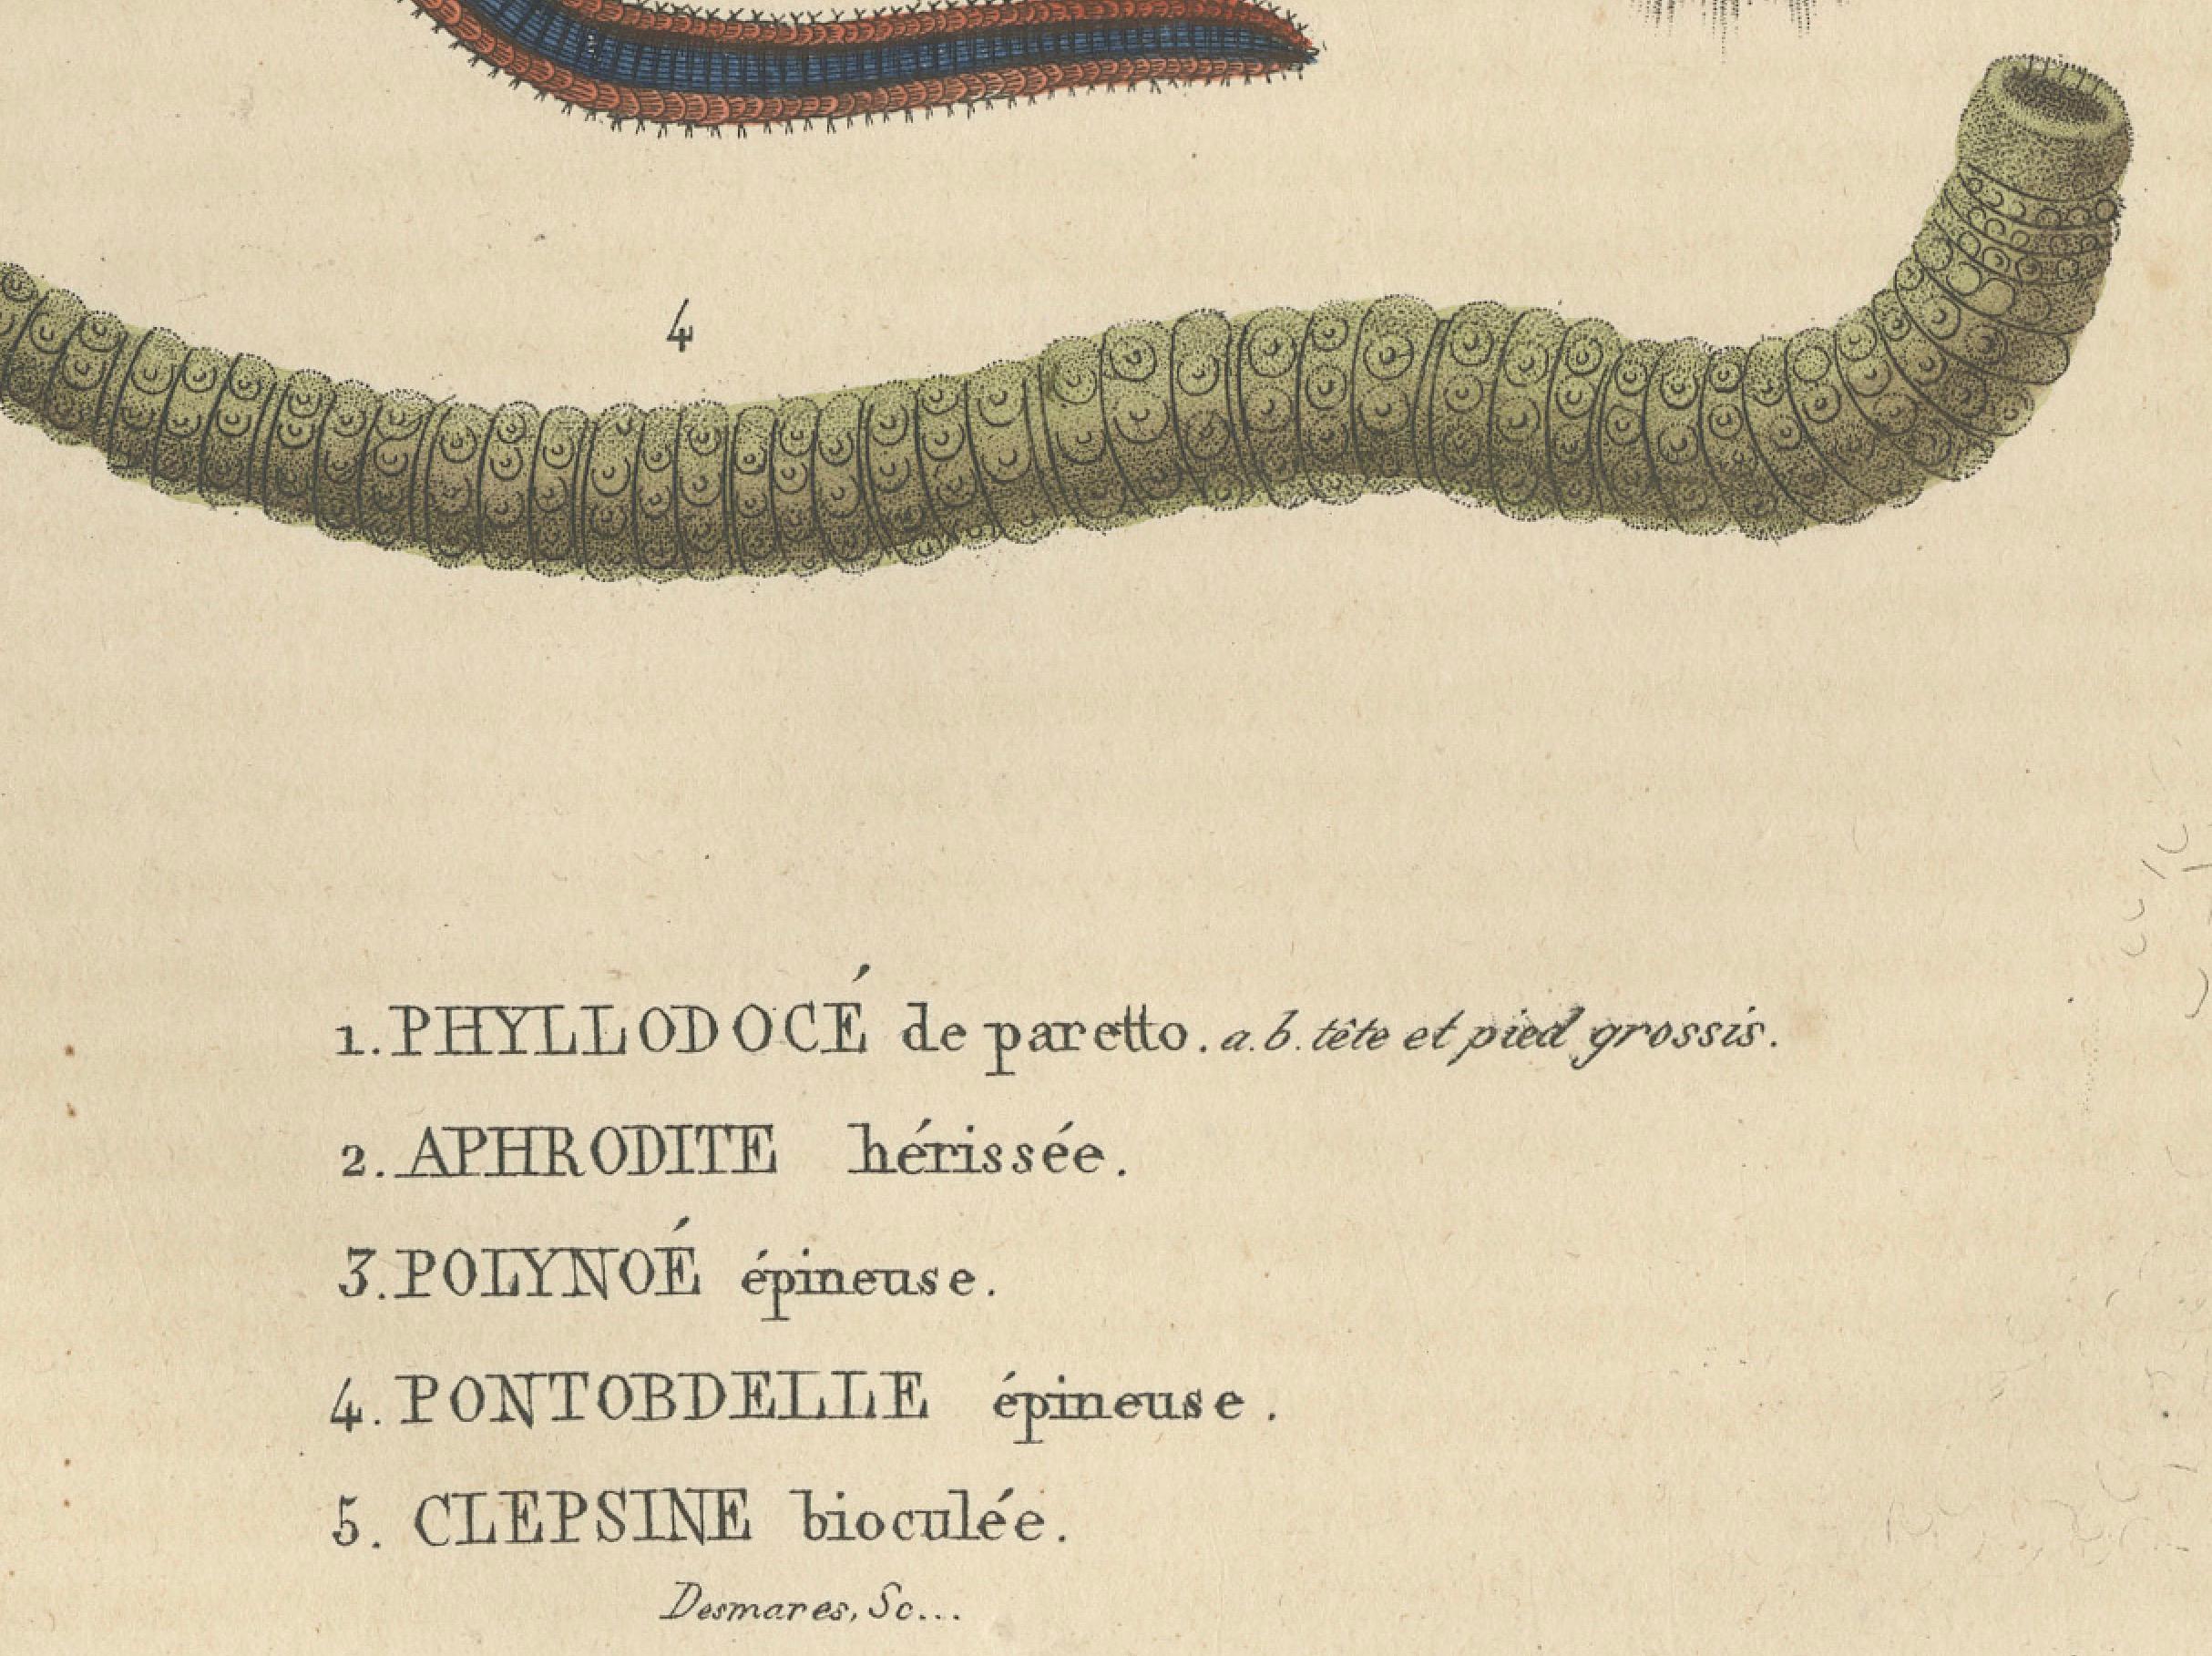 Engraved Varieties of Marine Invertebrates: Spined Worms and Bicolored Leech, 1845 For Sale